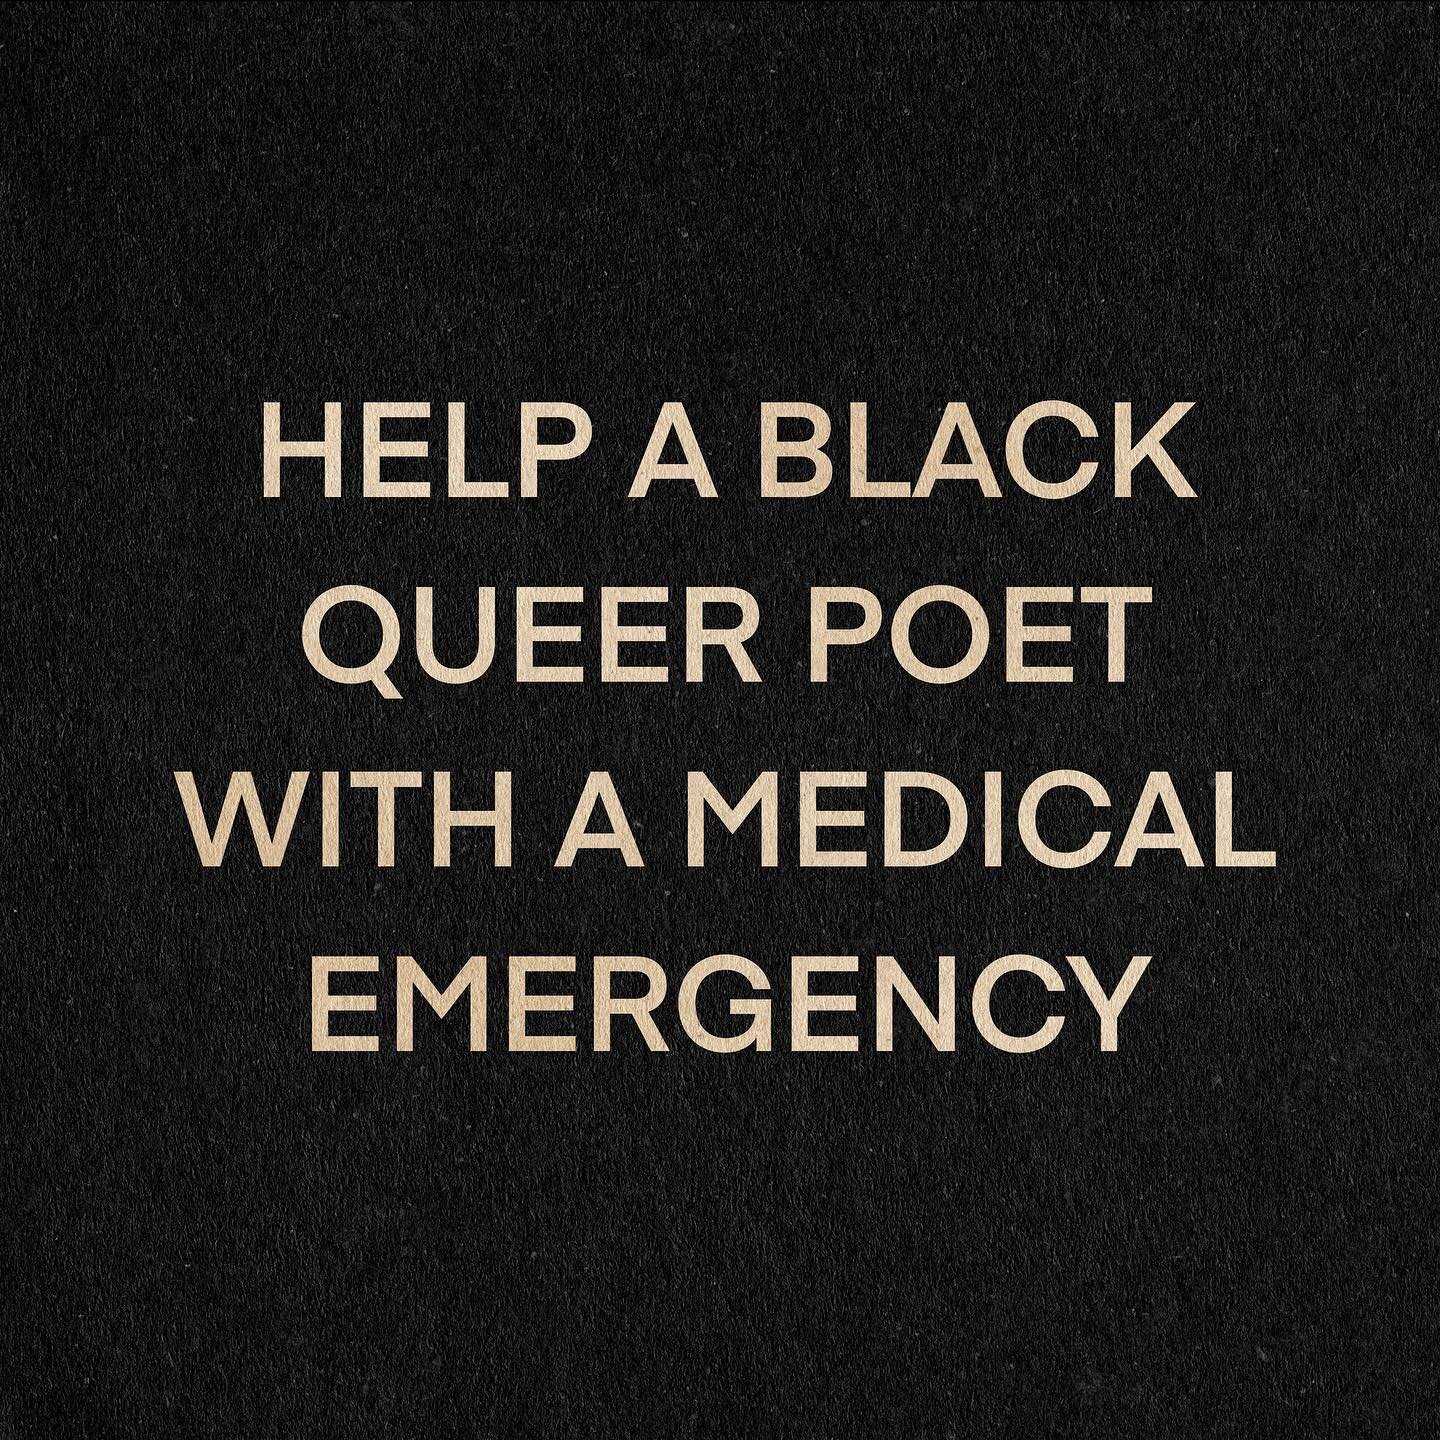 We need your help! Please share this post! We're raising money for a beloved Black queer poet in our community who needs our help! He doesn't have insurance and is in need of immediate dental work to take care of an infection that is at risk of getti